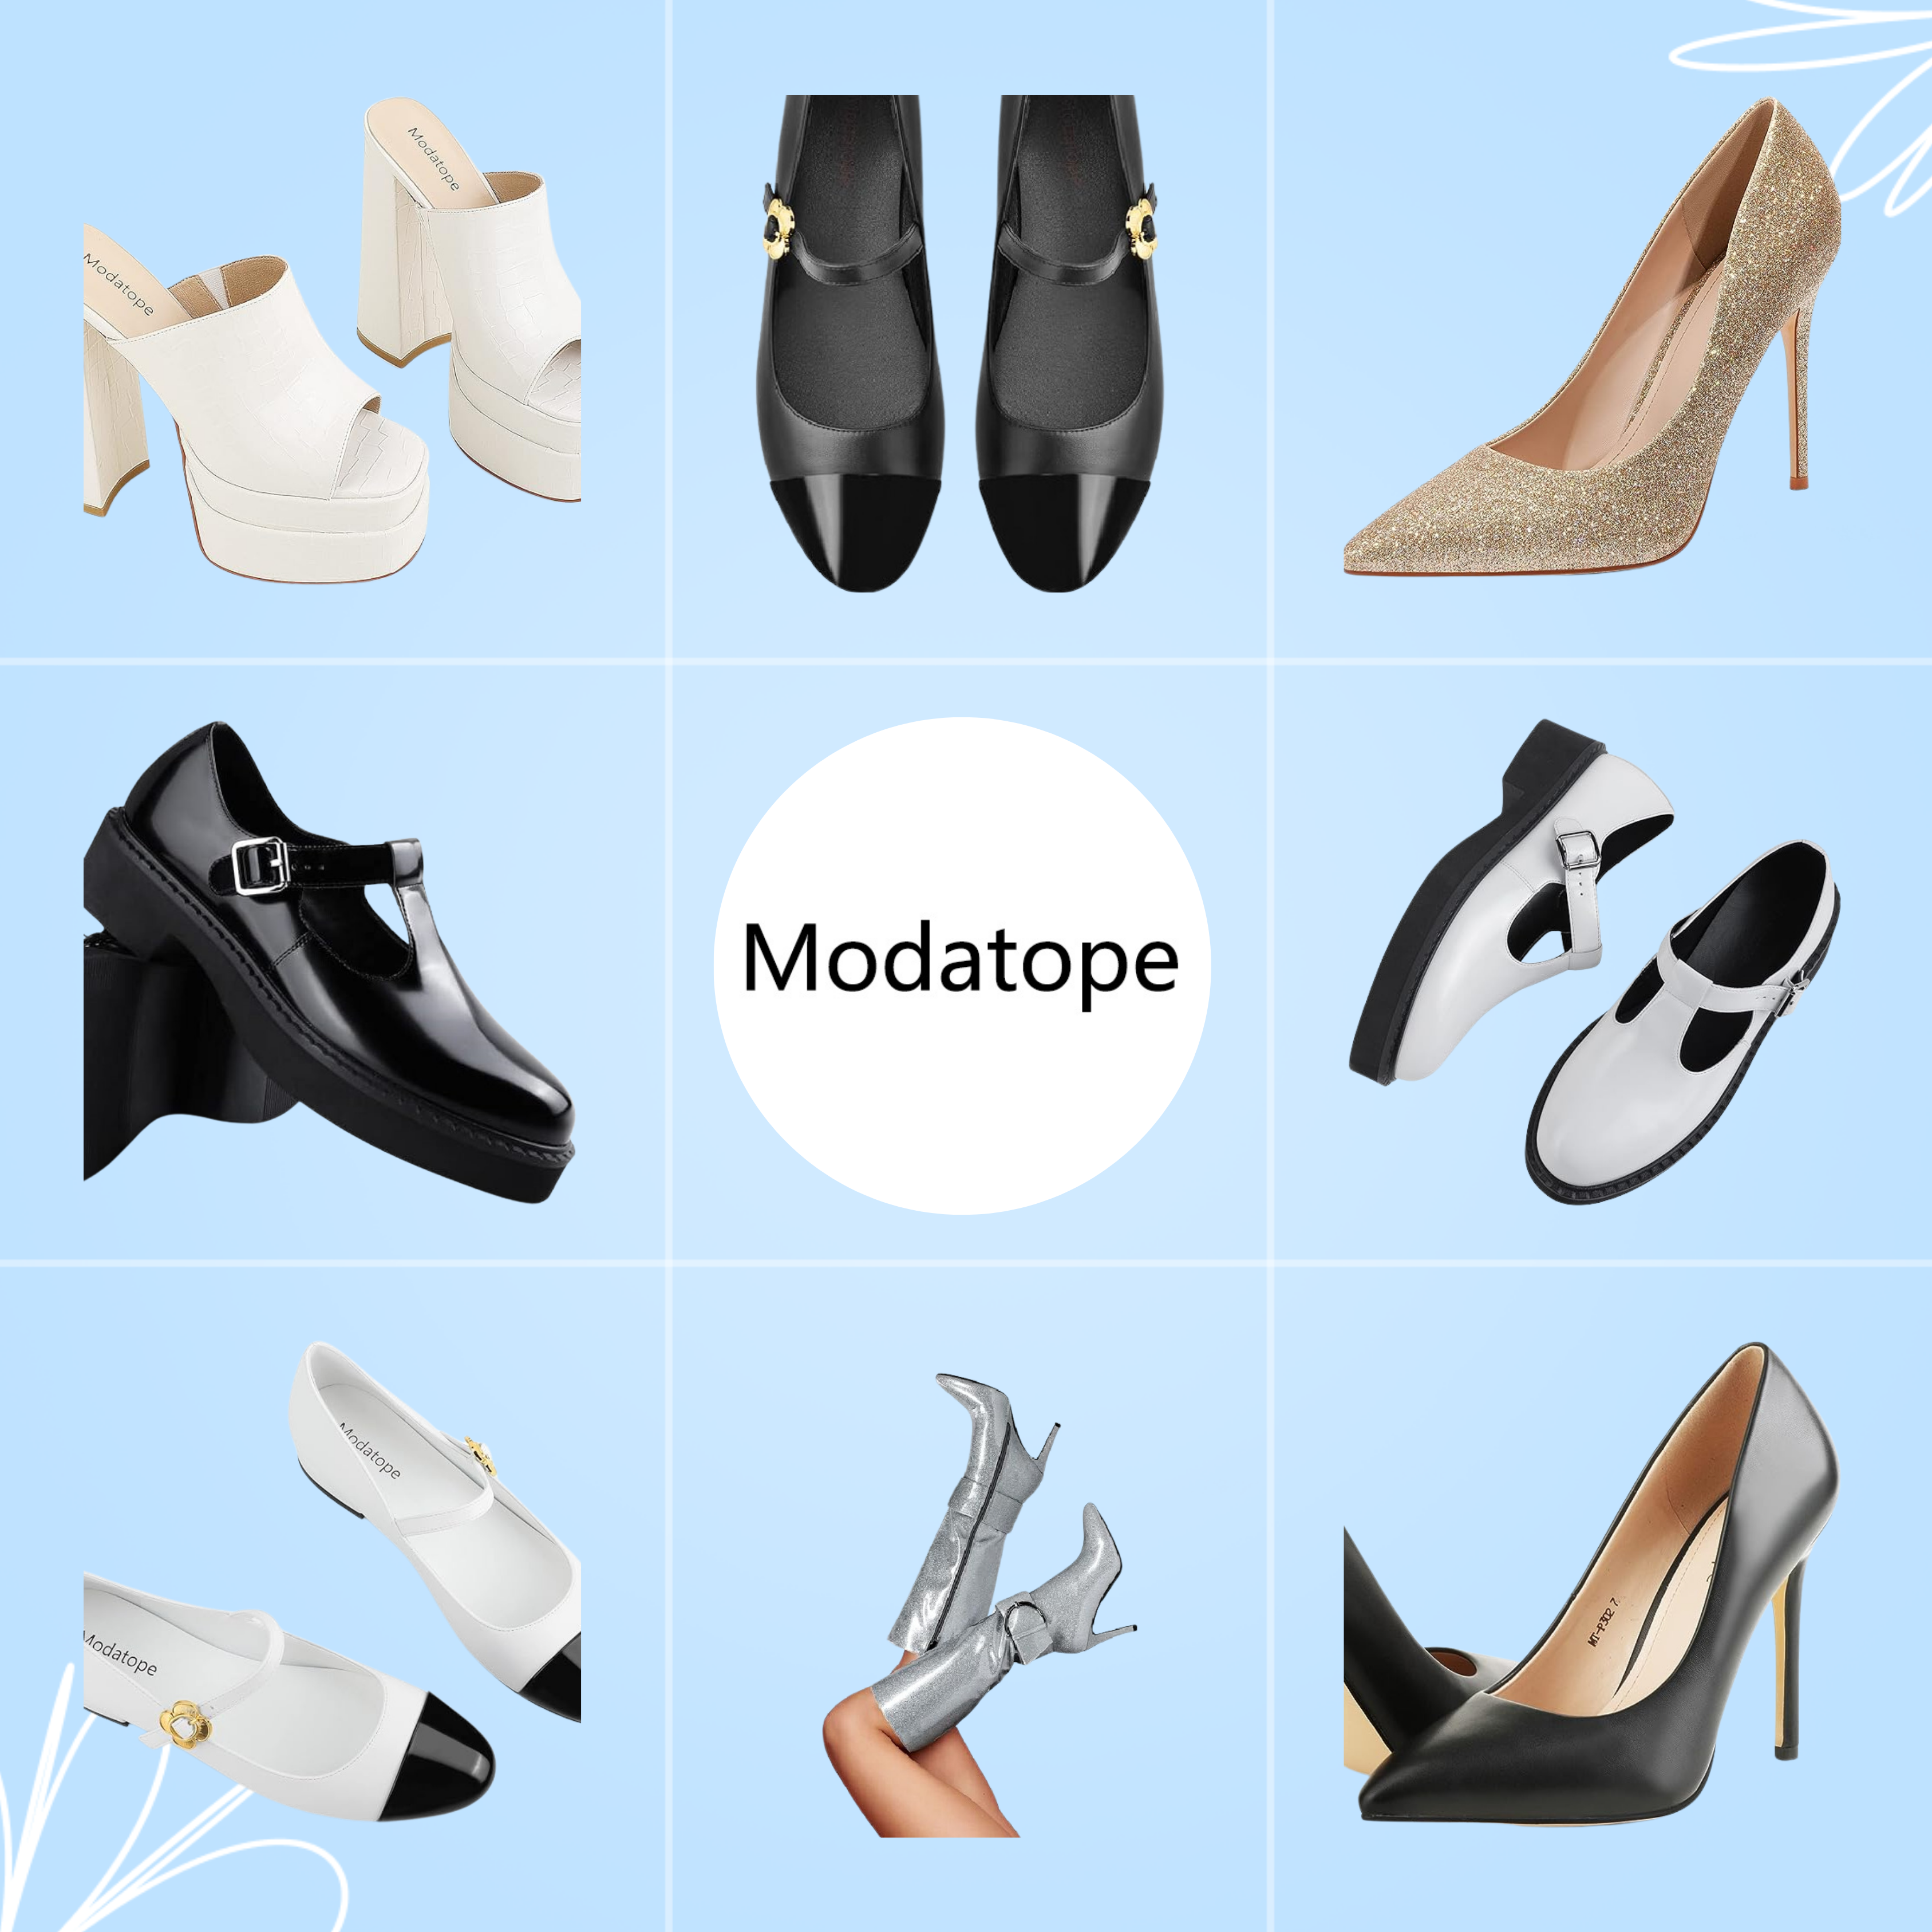 Brand image for Modatope